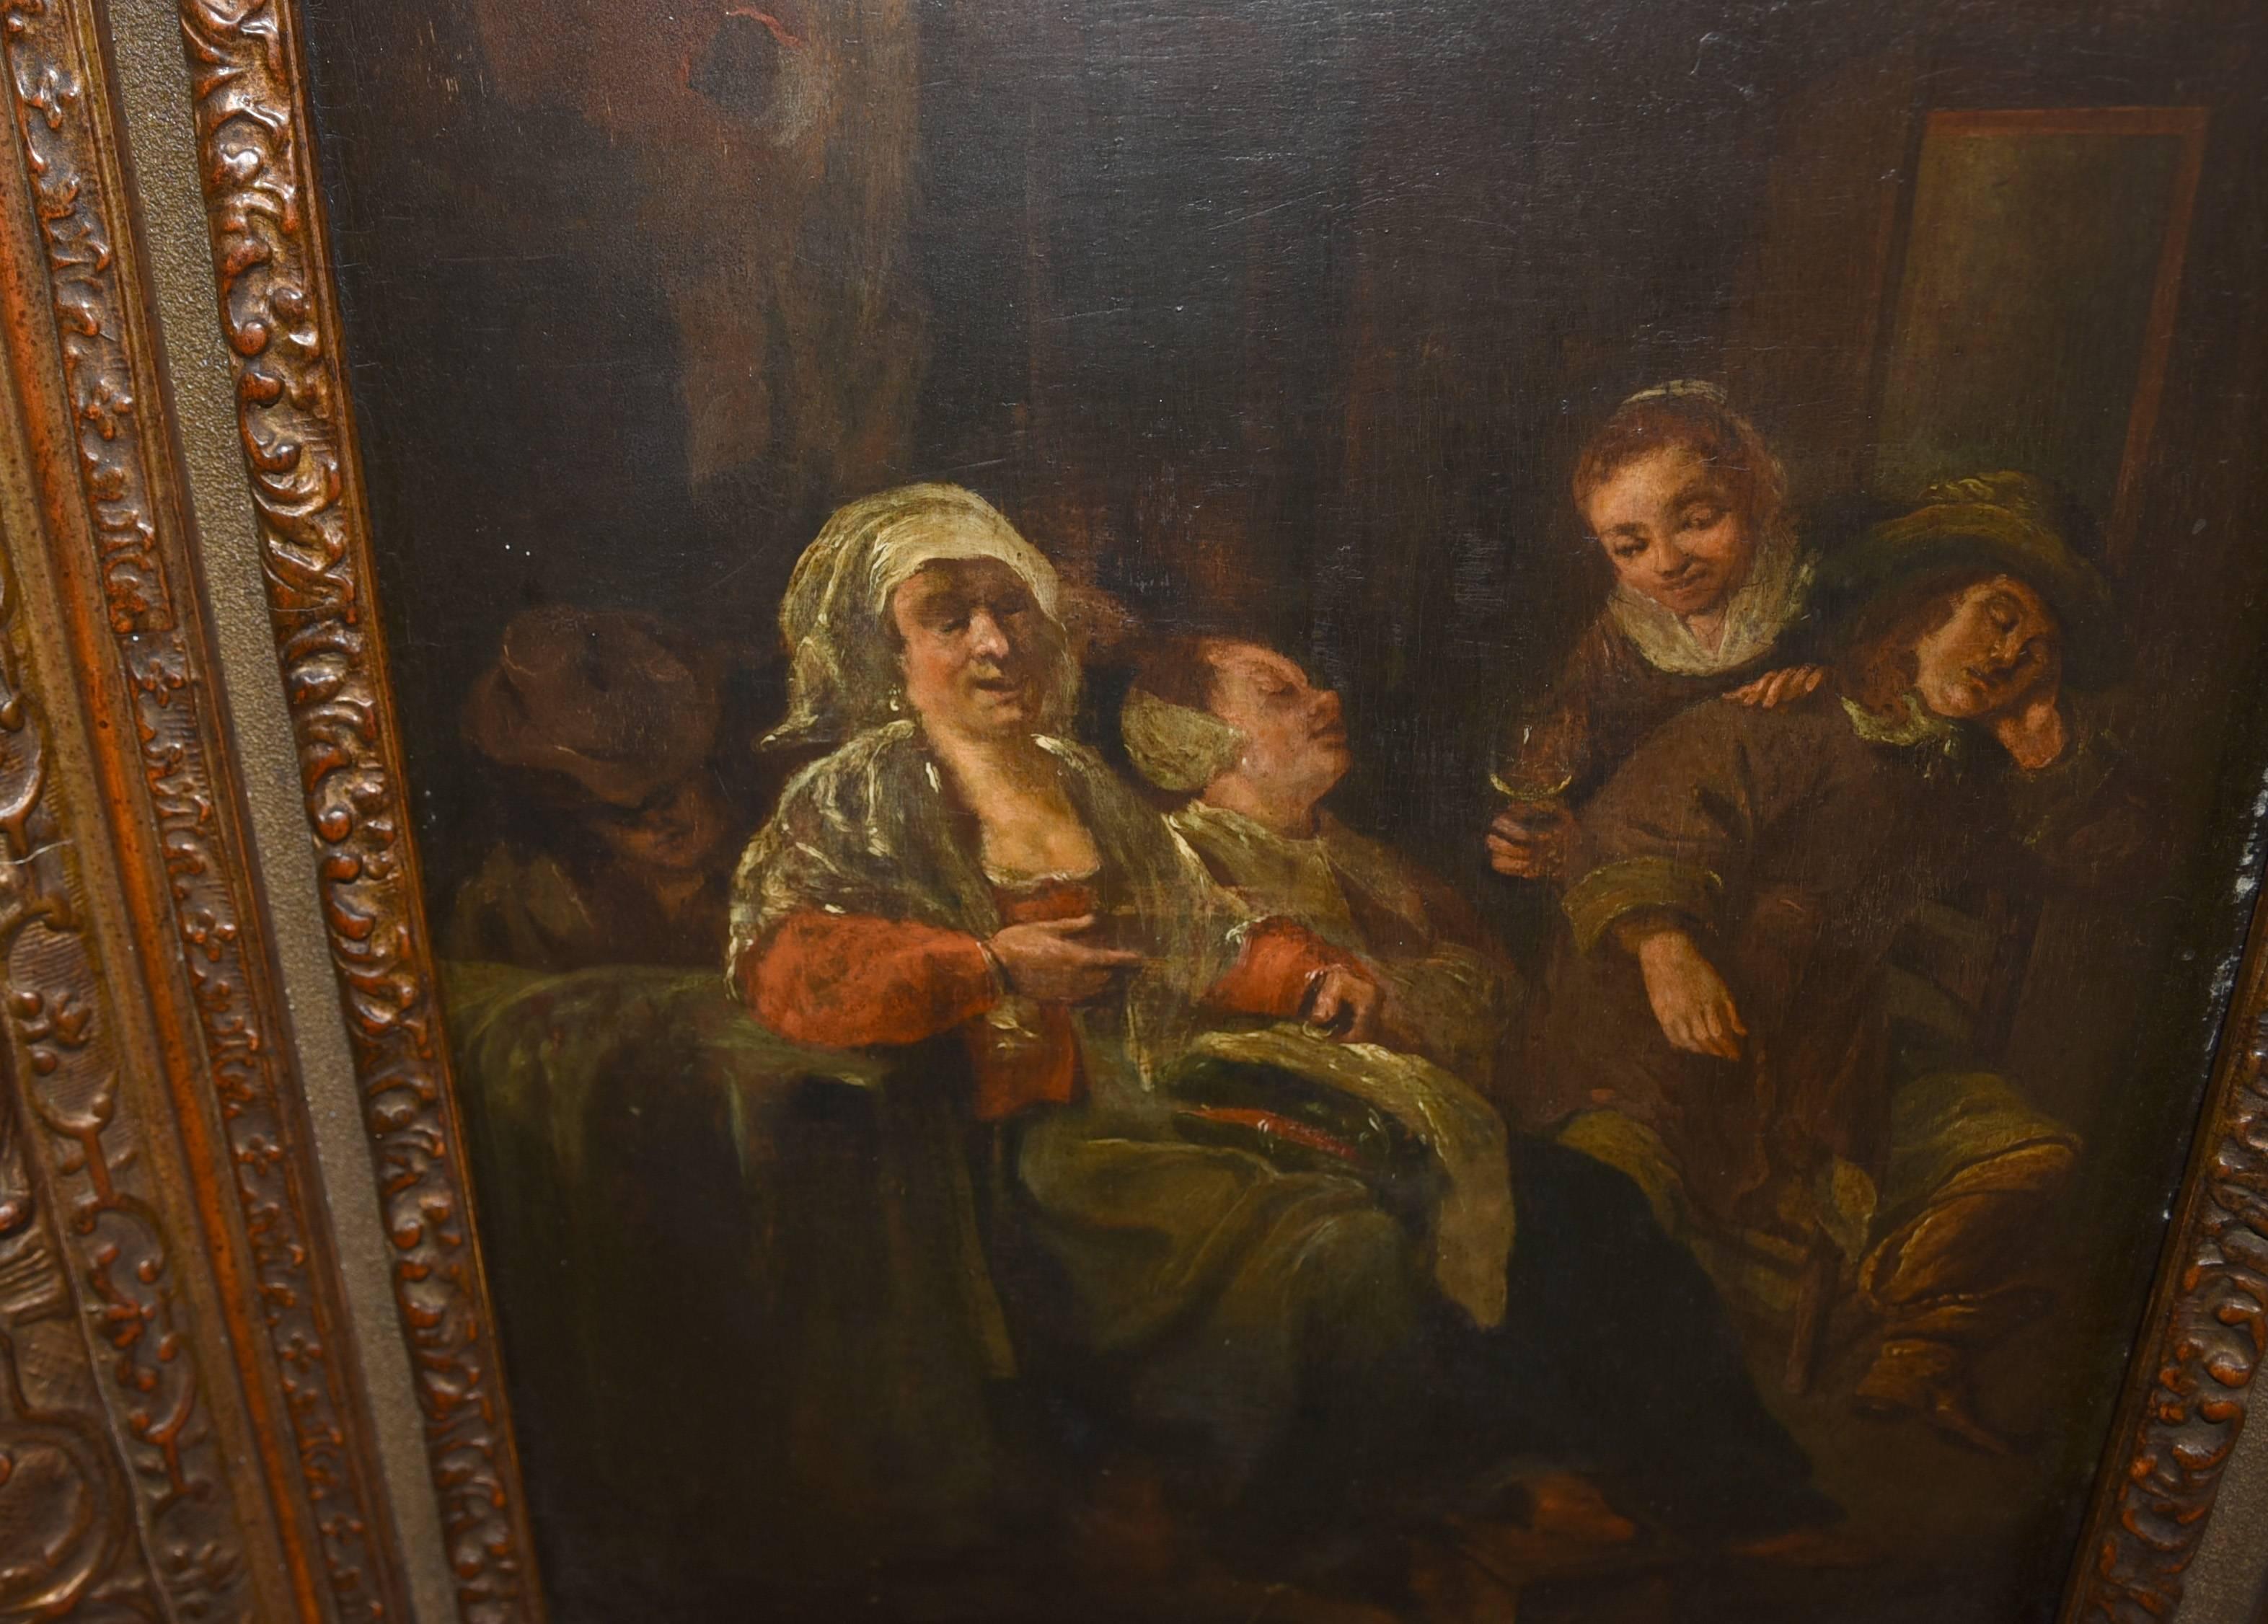 Gorgeous antique Dutch oil painting depicting a gentle family scene
Particularly love the original frame
Hopefully the close up photos illustrate the intricate brushwork style
Note if you would like to view in our Herts showroom please contact us